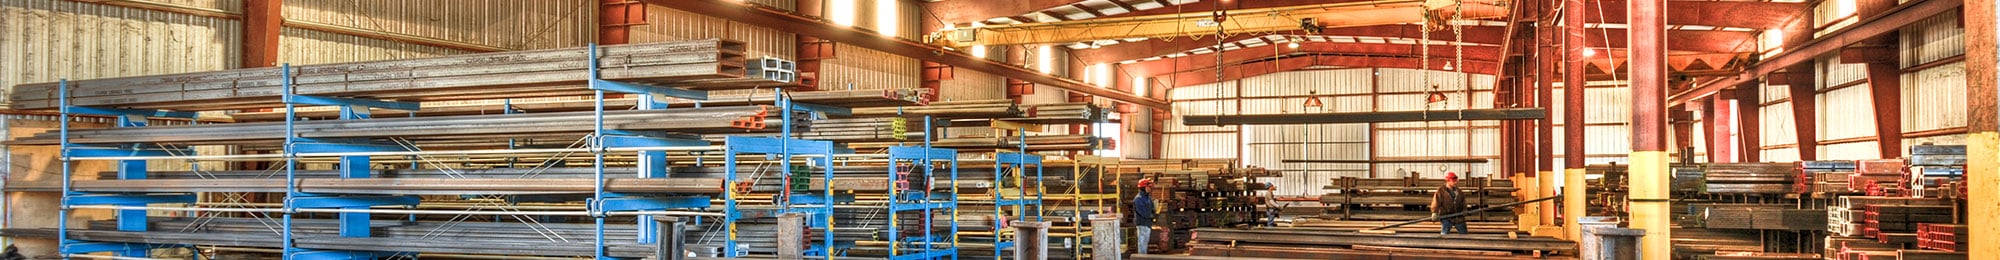 Willbanks Metals - Sheet, Plate, & Structural Steel Products